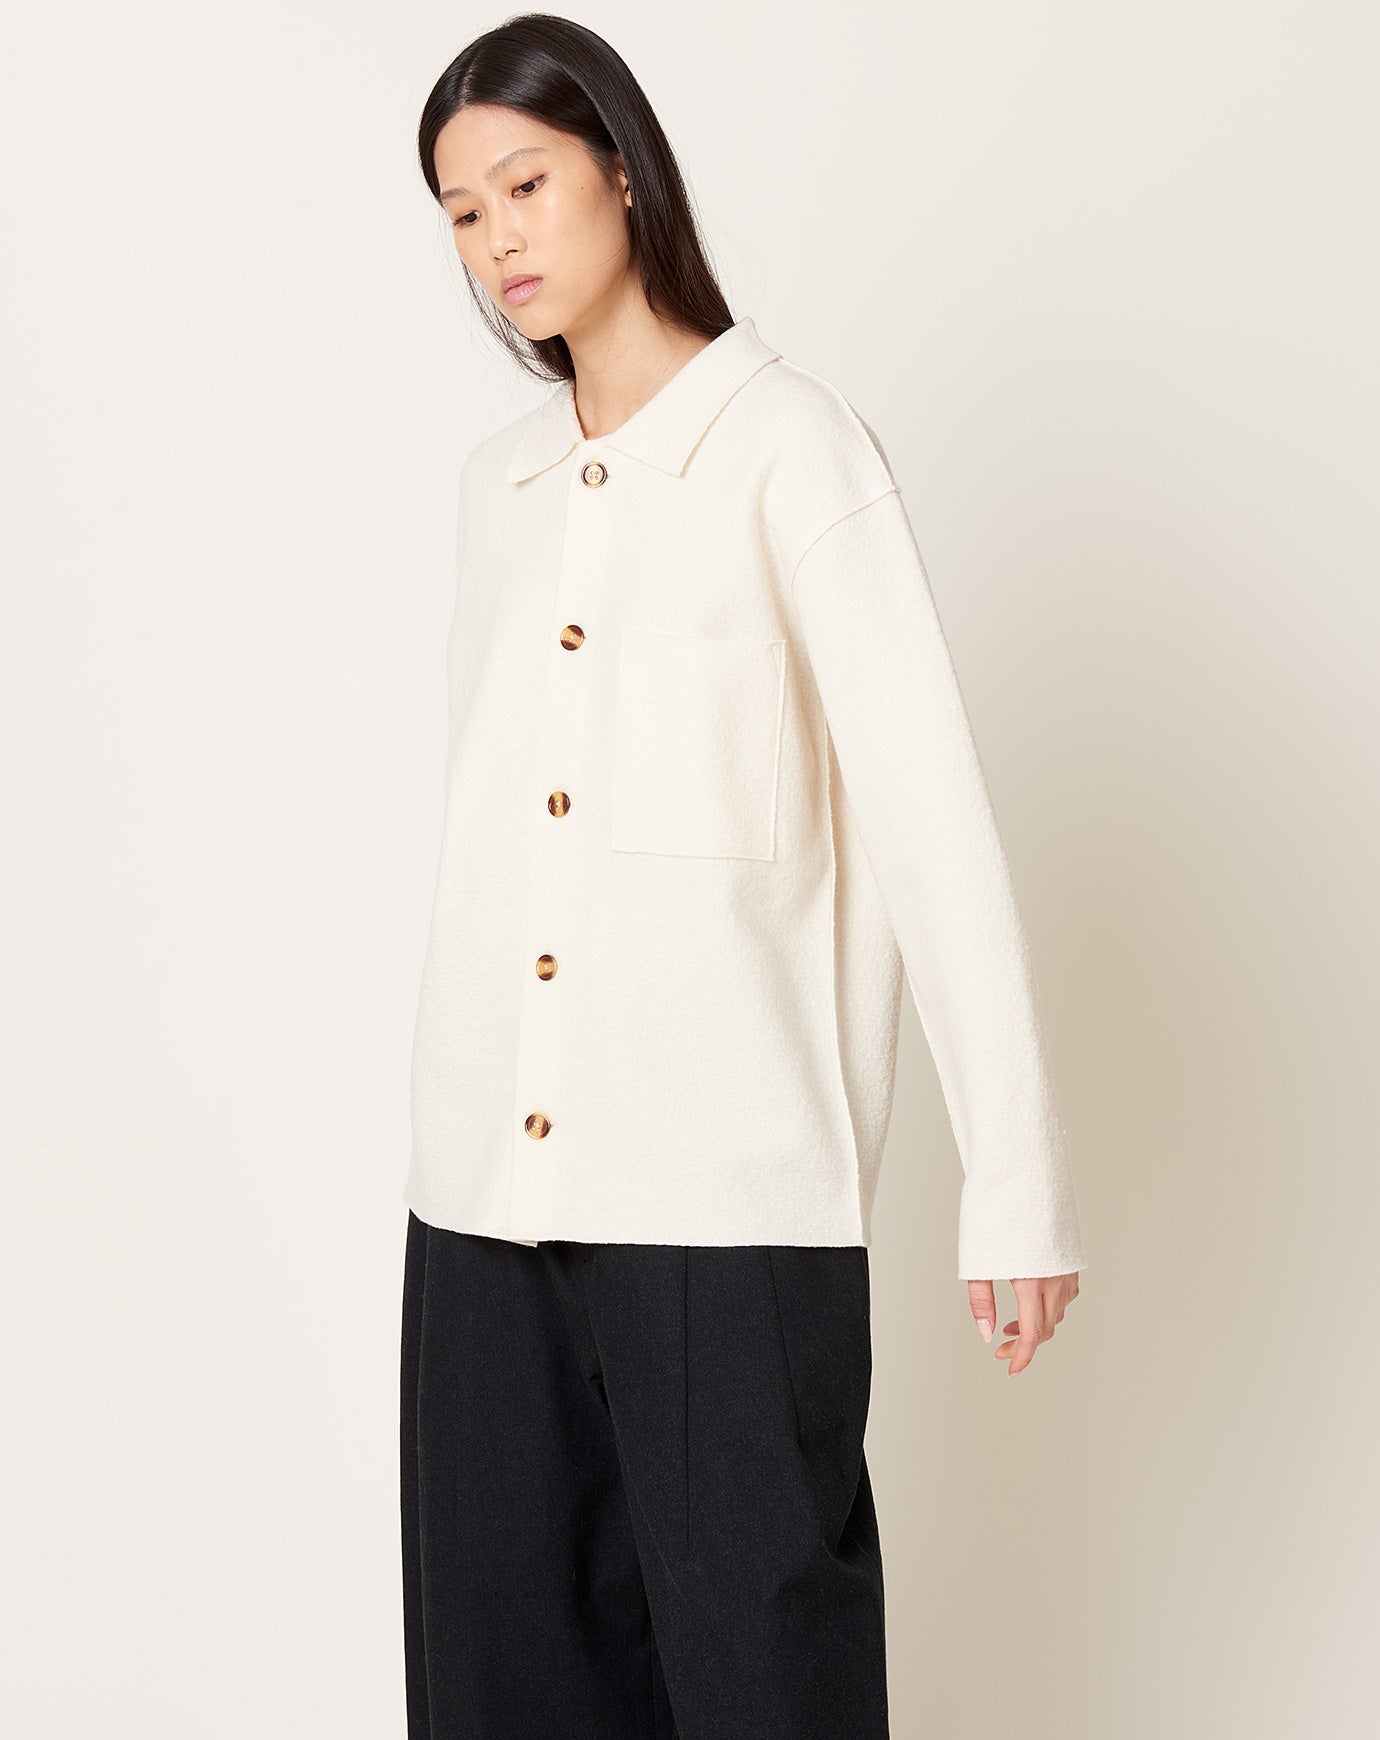 7115 by Szeki Boiled Wool Shirt in Off White